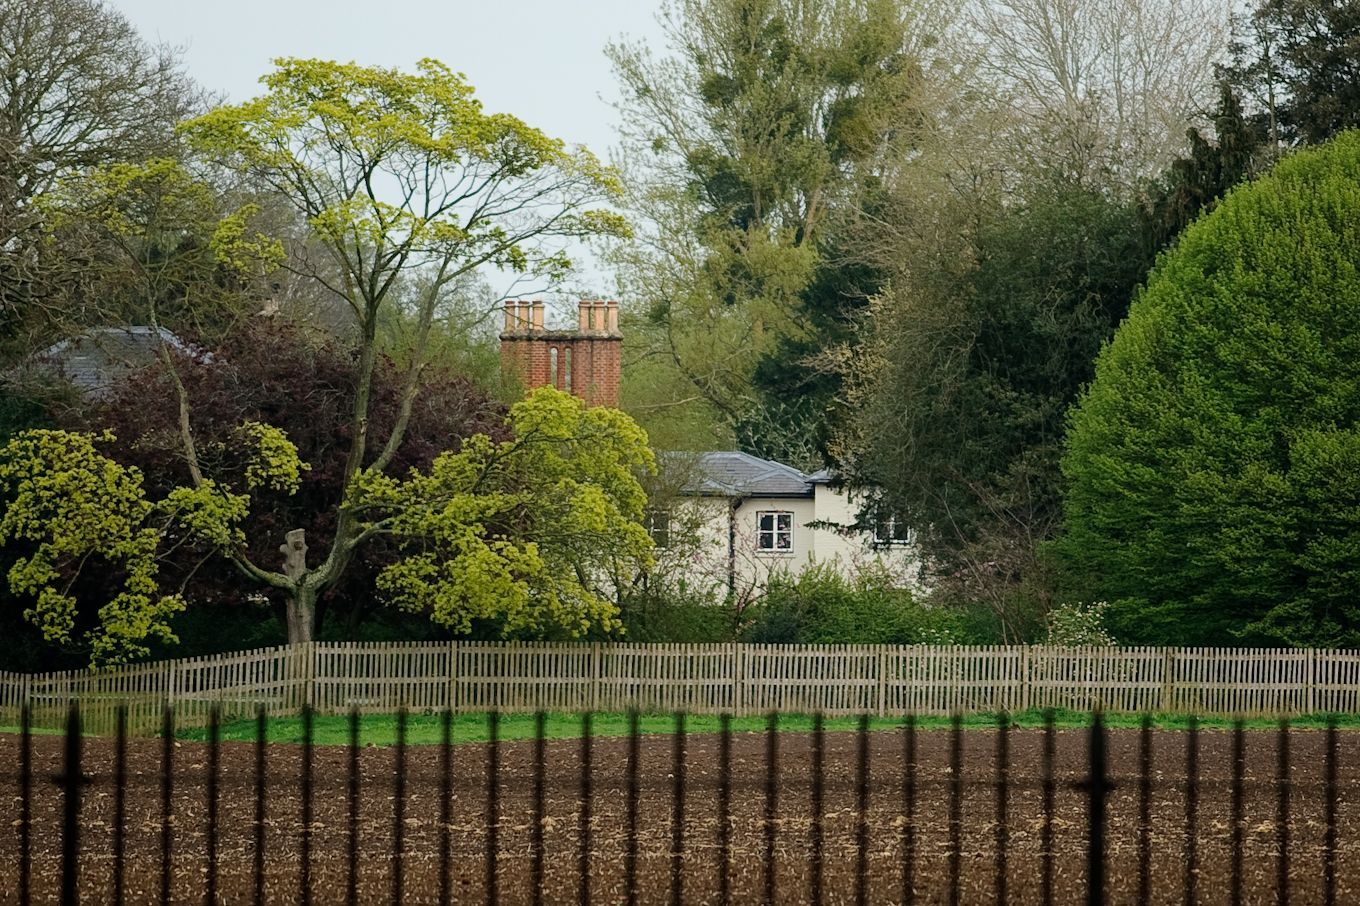 WINDSOR, ENGLAND - APRIL 10: A general view of Frogmore Cottage at Frogmore Cottage on April 10, 2019 in Windsor, England. The cottage is situated on the Frogmore Estate, itself part of Home Park, Windsor, in Berkshire. It is the new home of Prince Harry, Duke of Sussex and Meghan, Duchess of Sussex. (Photo by GOR/Getty Images)